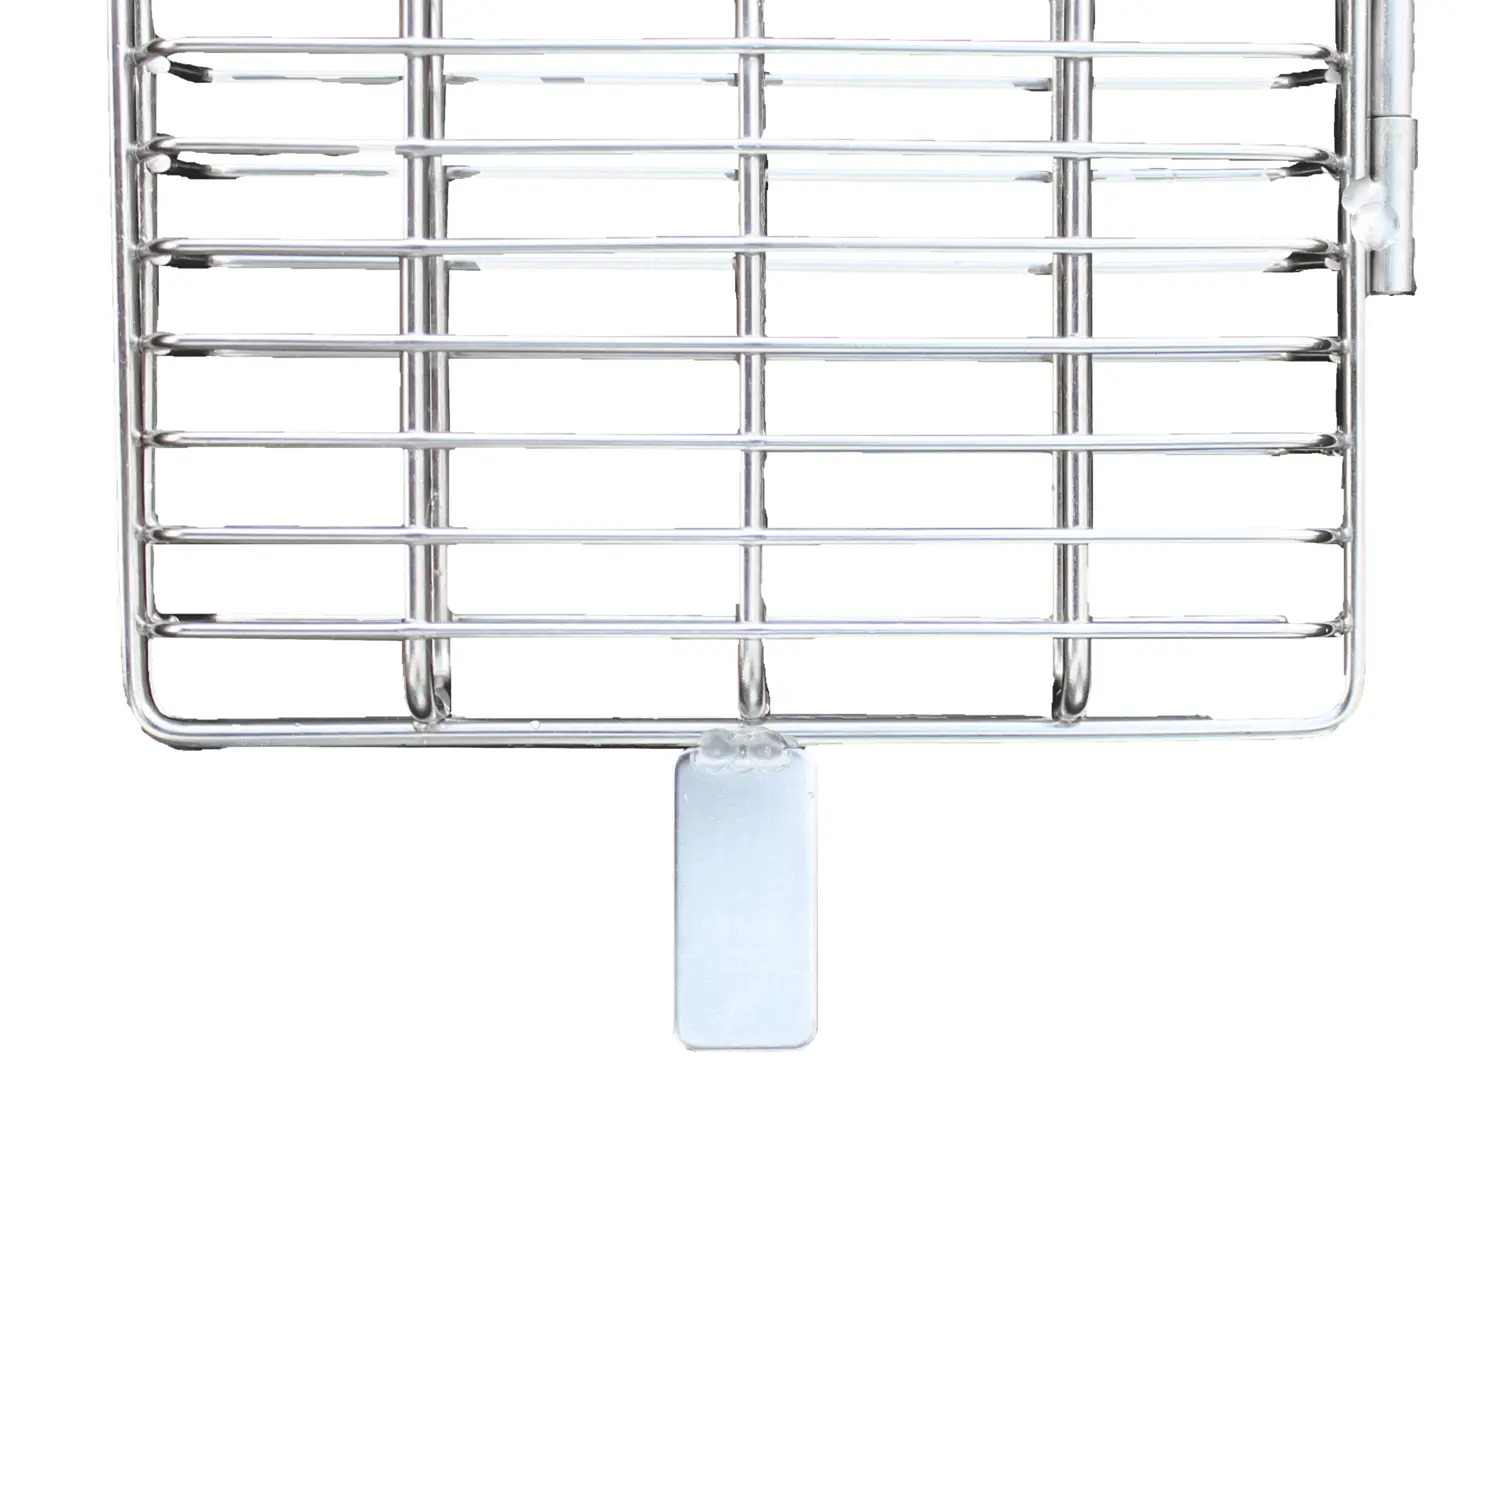 Brazilian Flame Flat Rotisserie Grill Basket - Beef  Poultry - image 3 of 9